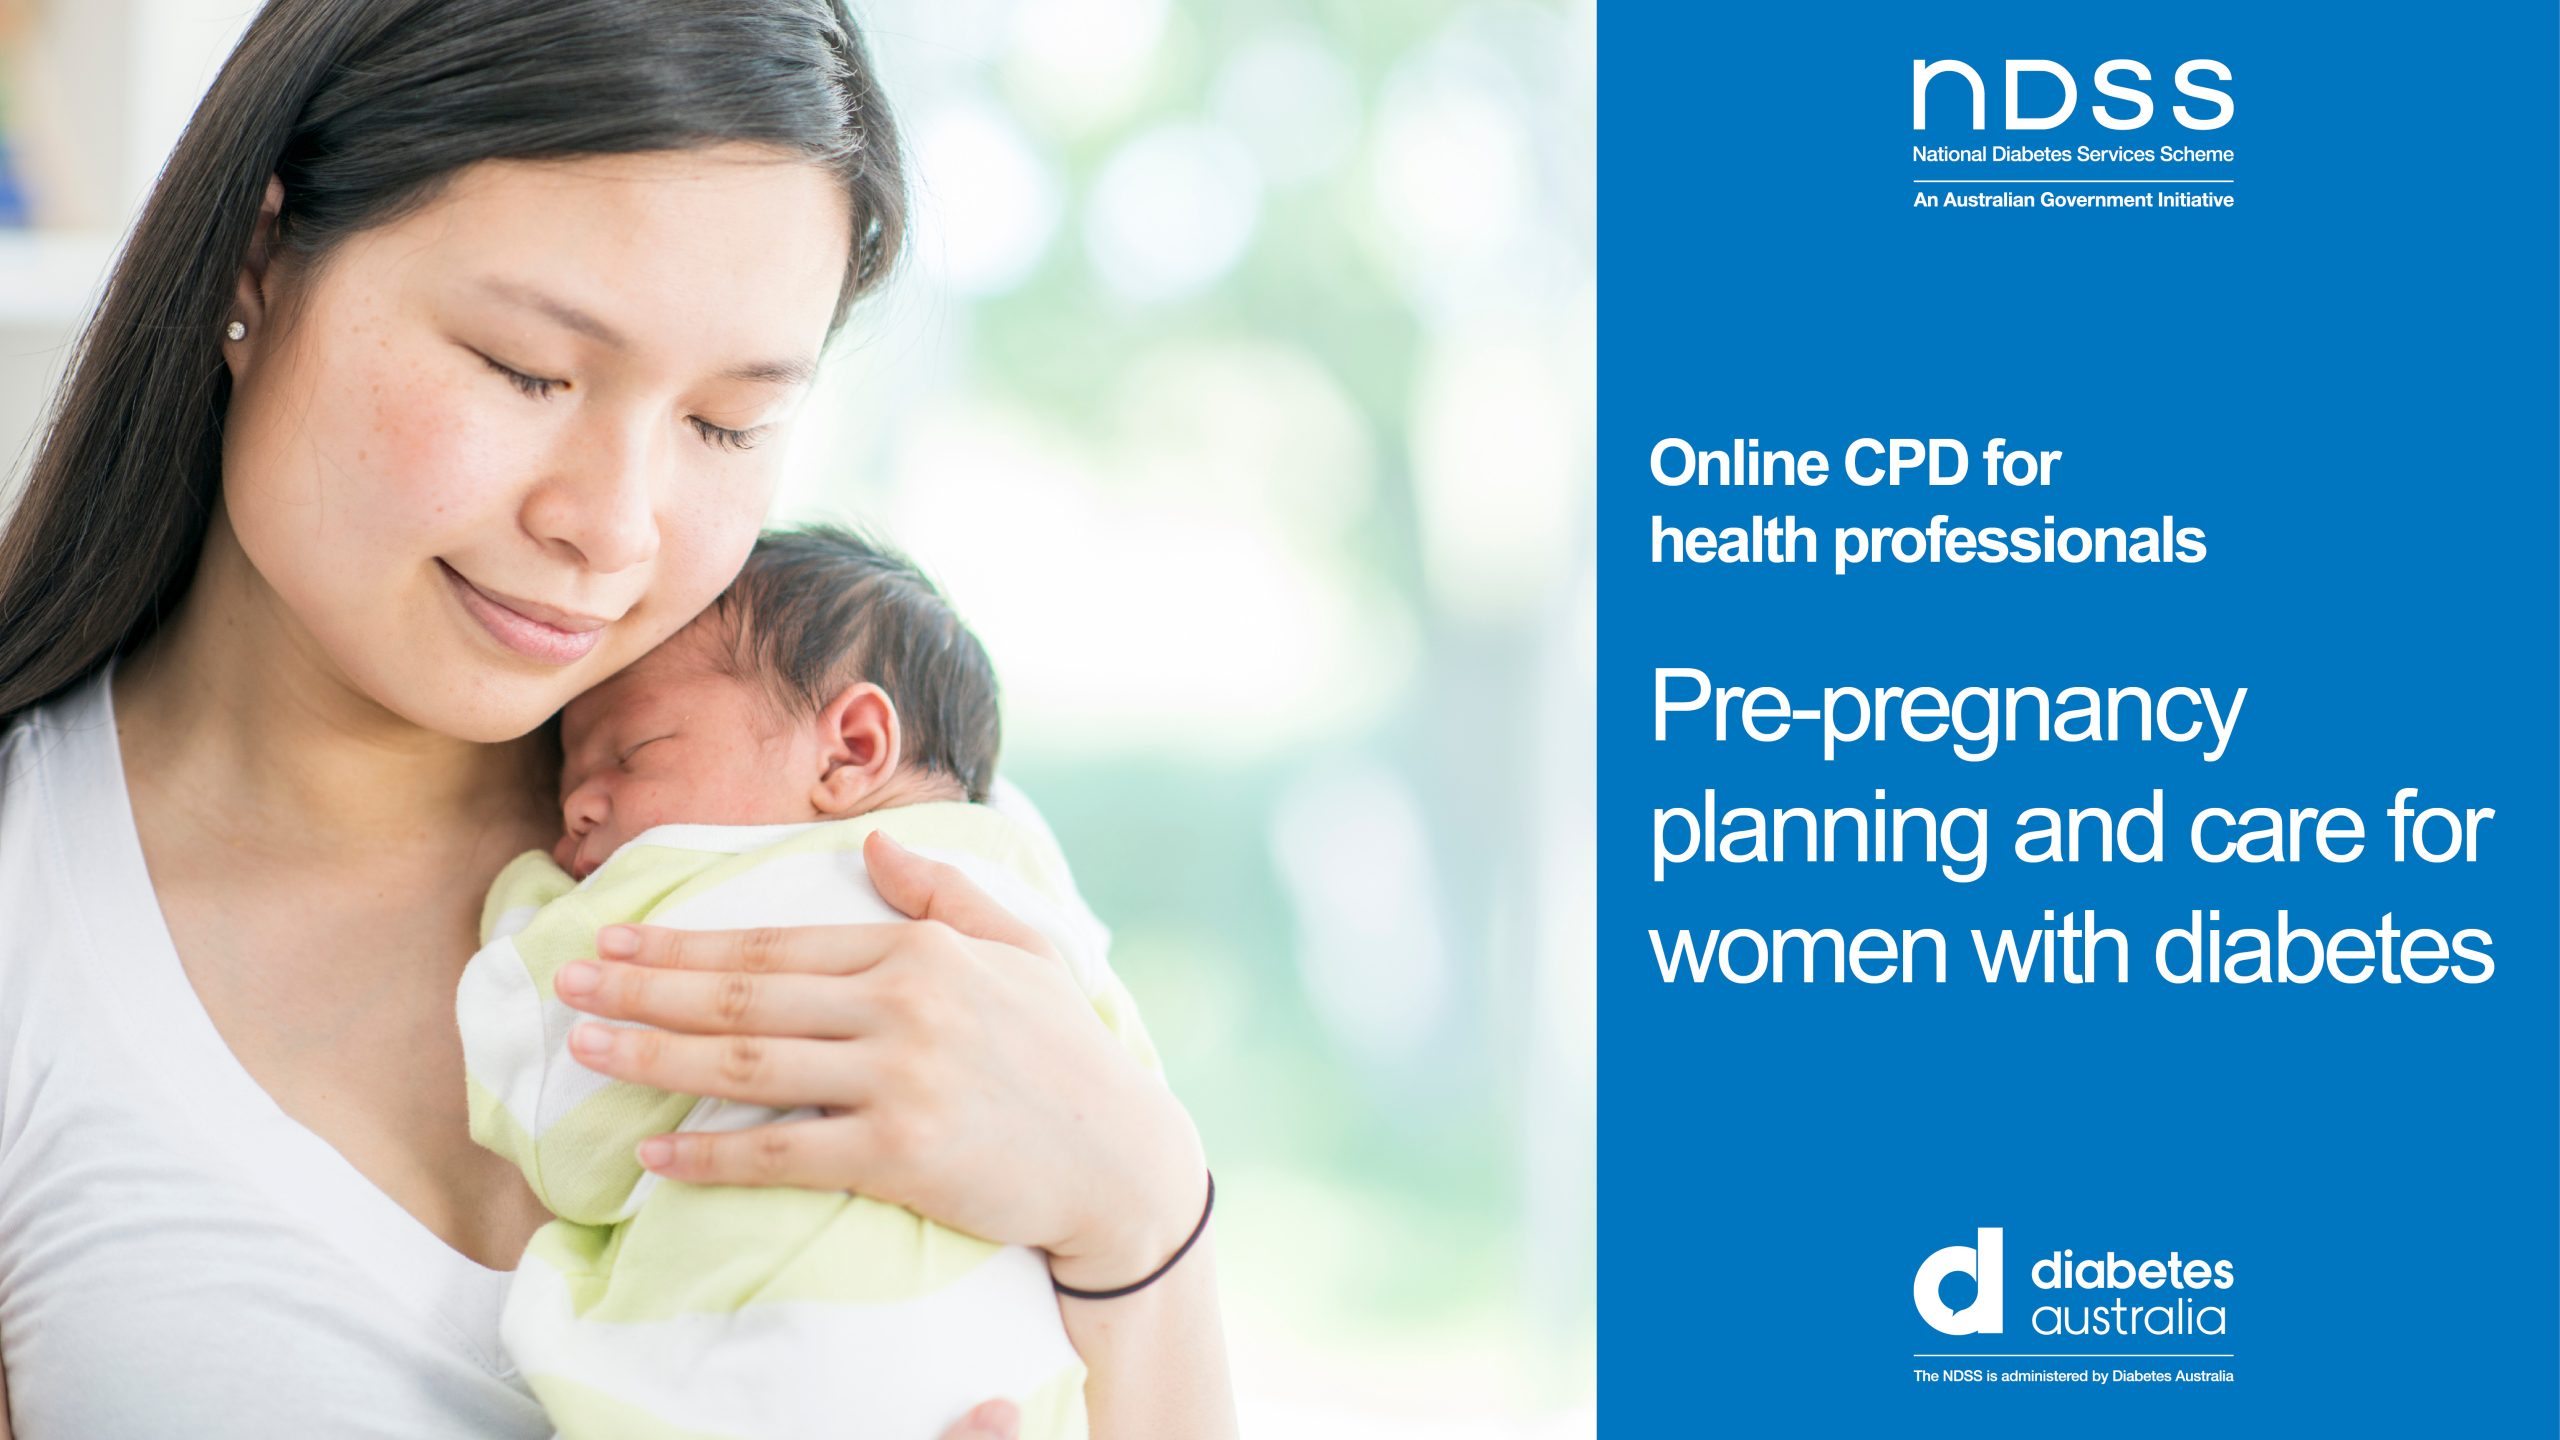 Pre-pregnancy planning and care for women with diabetes